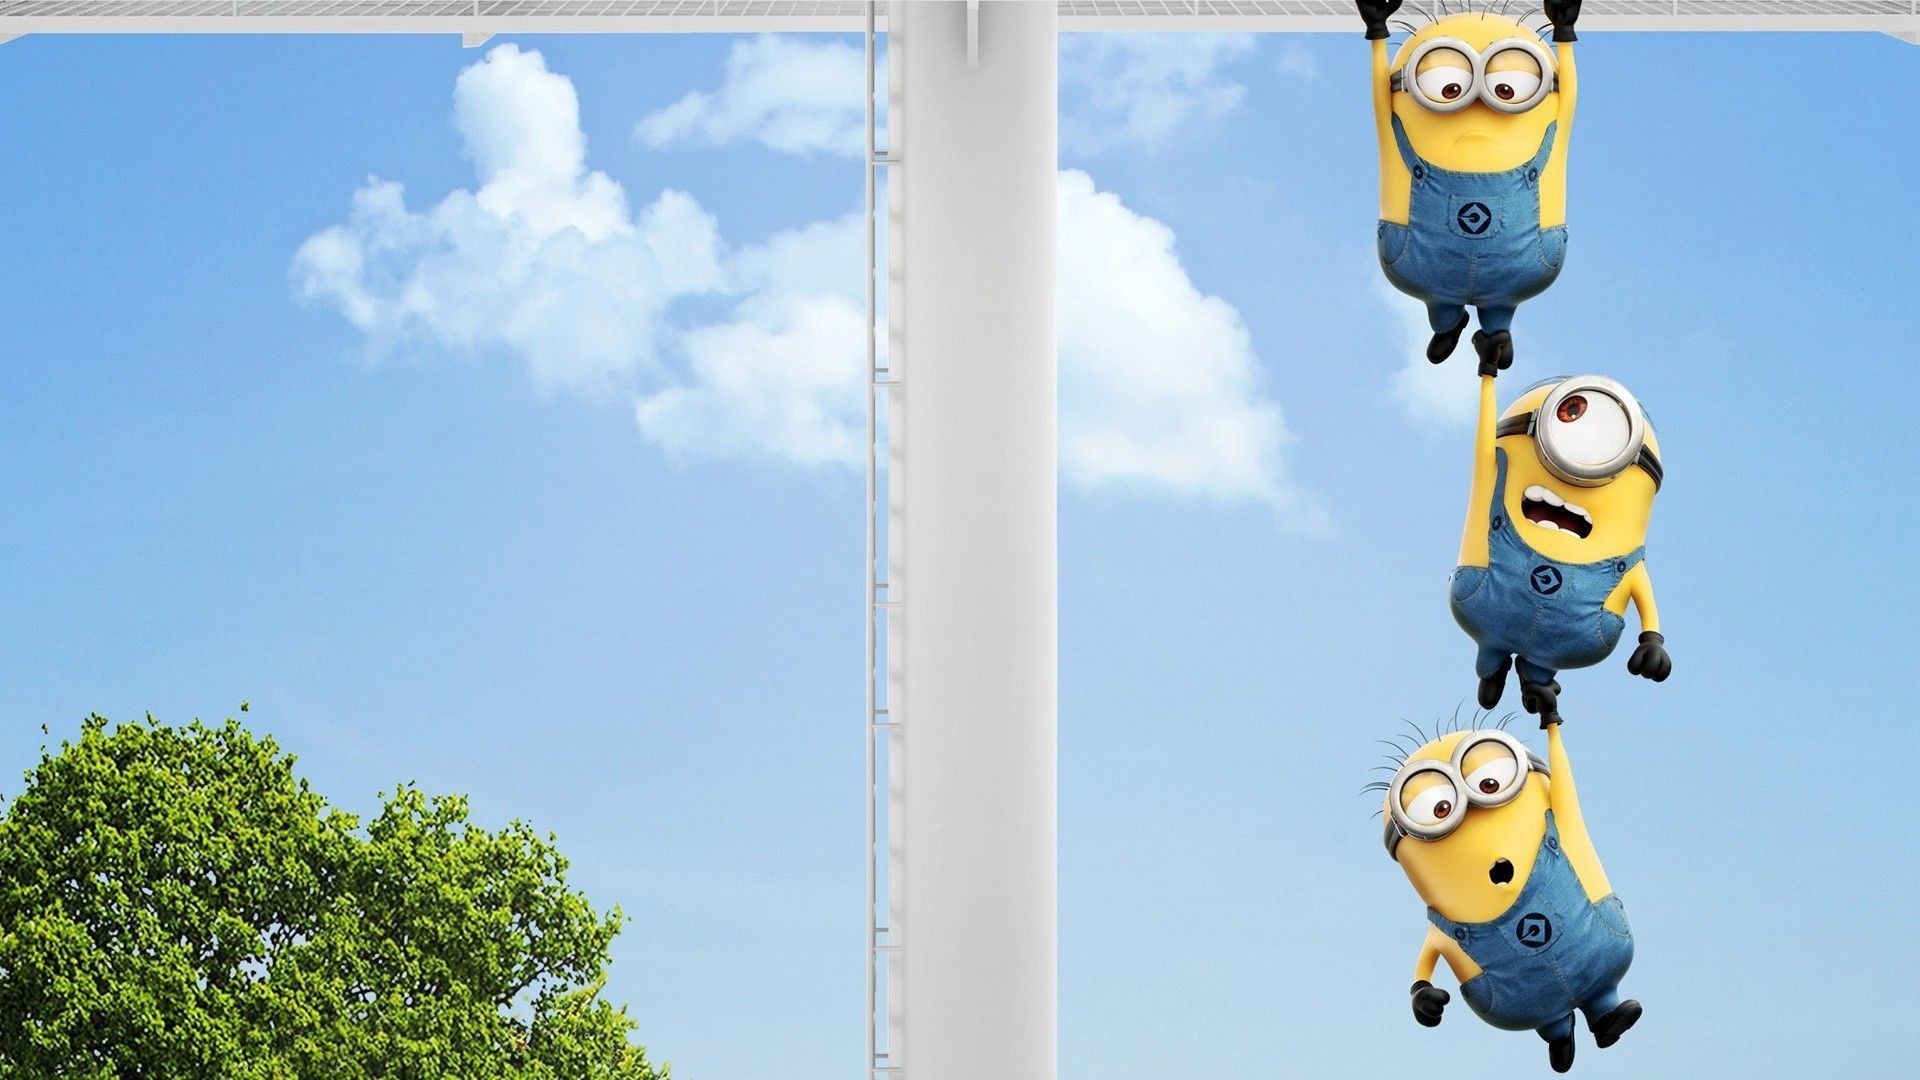 Funny Minions Wallpaper for Desktop (80+ images)